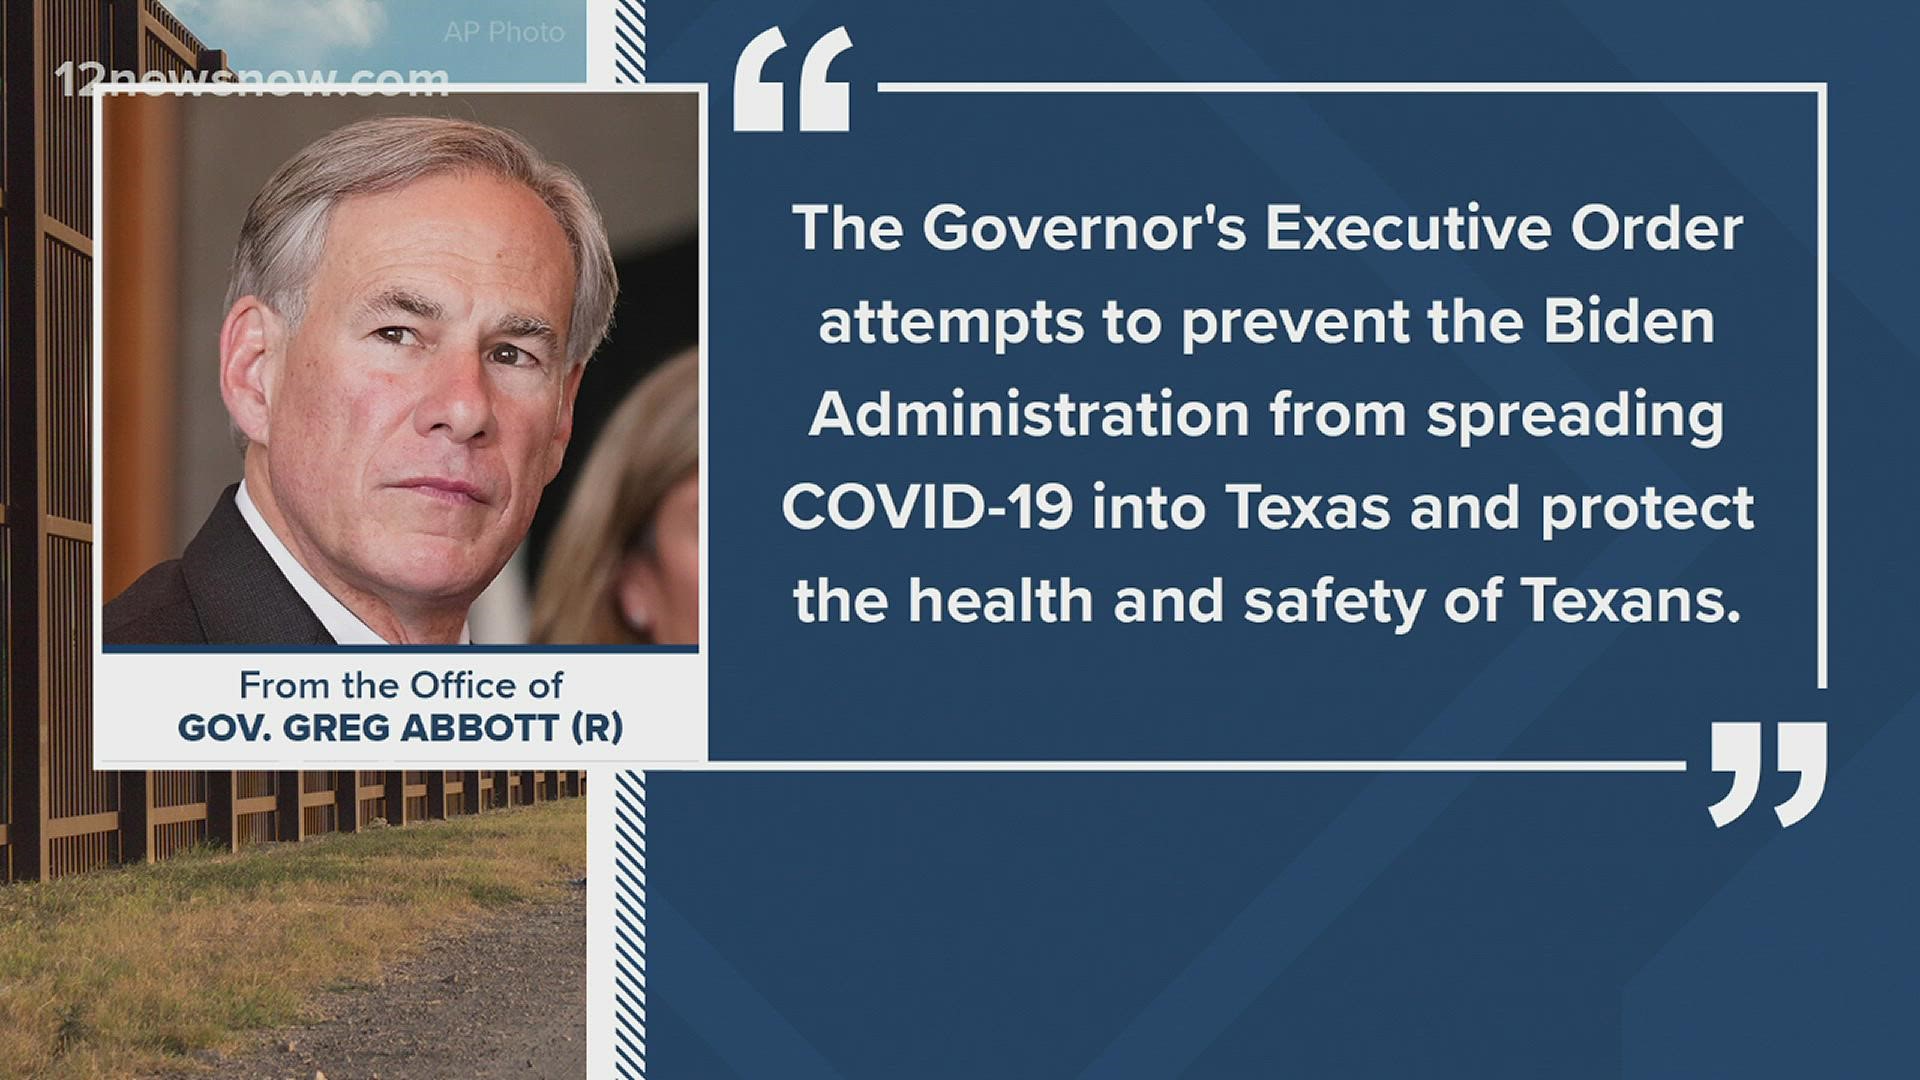 Opponents called it racial profiling.  Gov. Greg Abbott released a statement after the law was blocked.